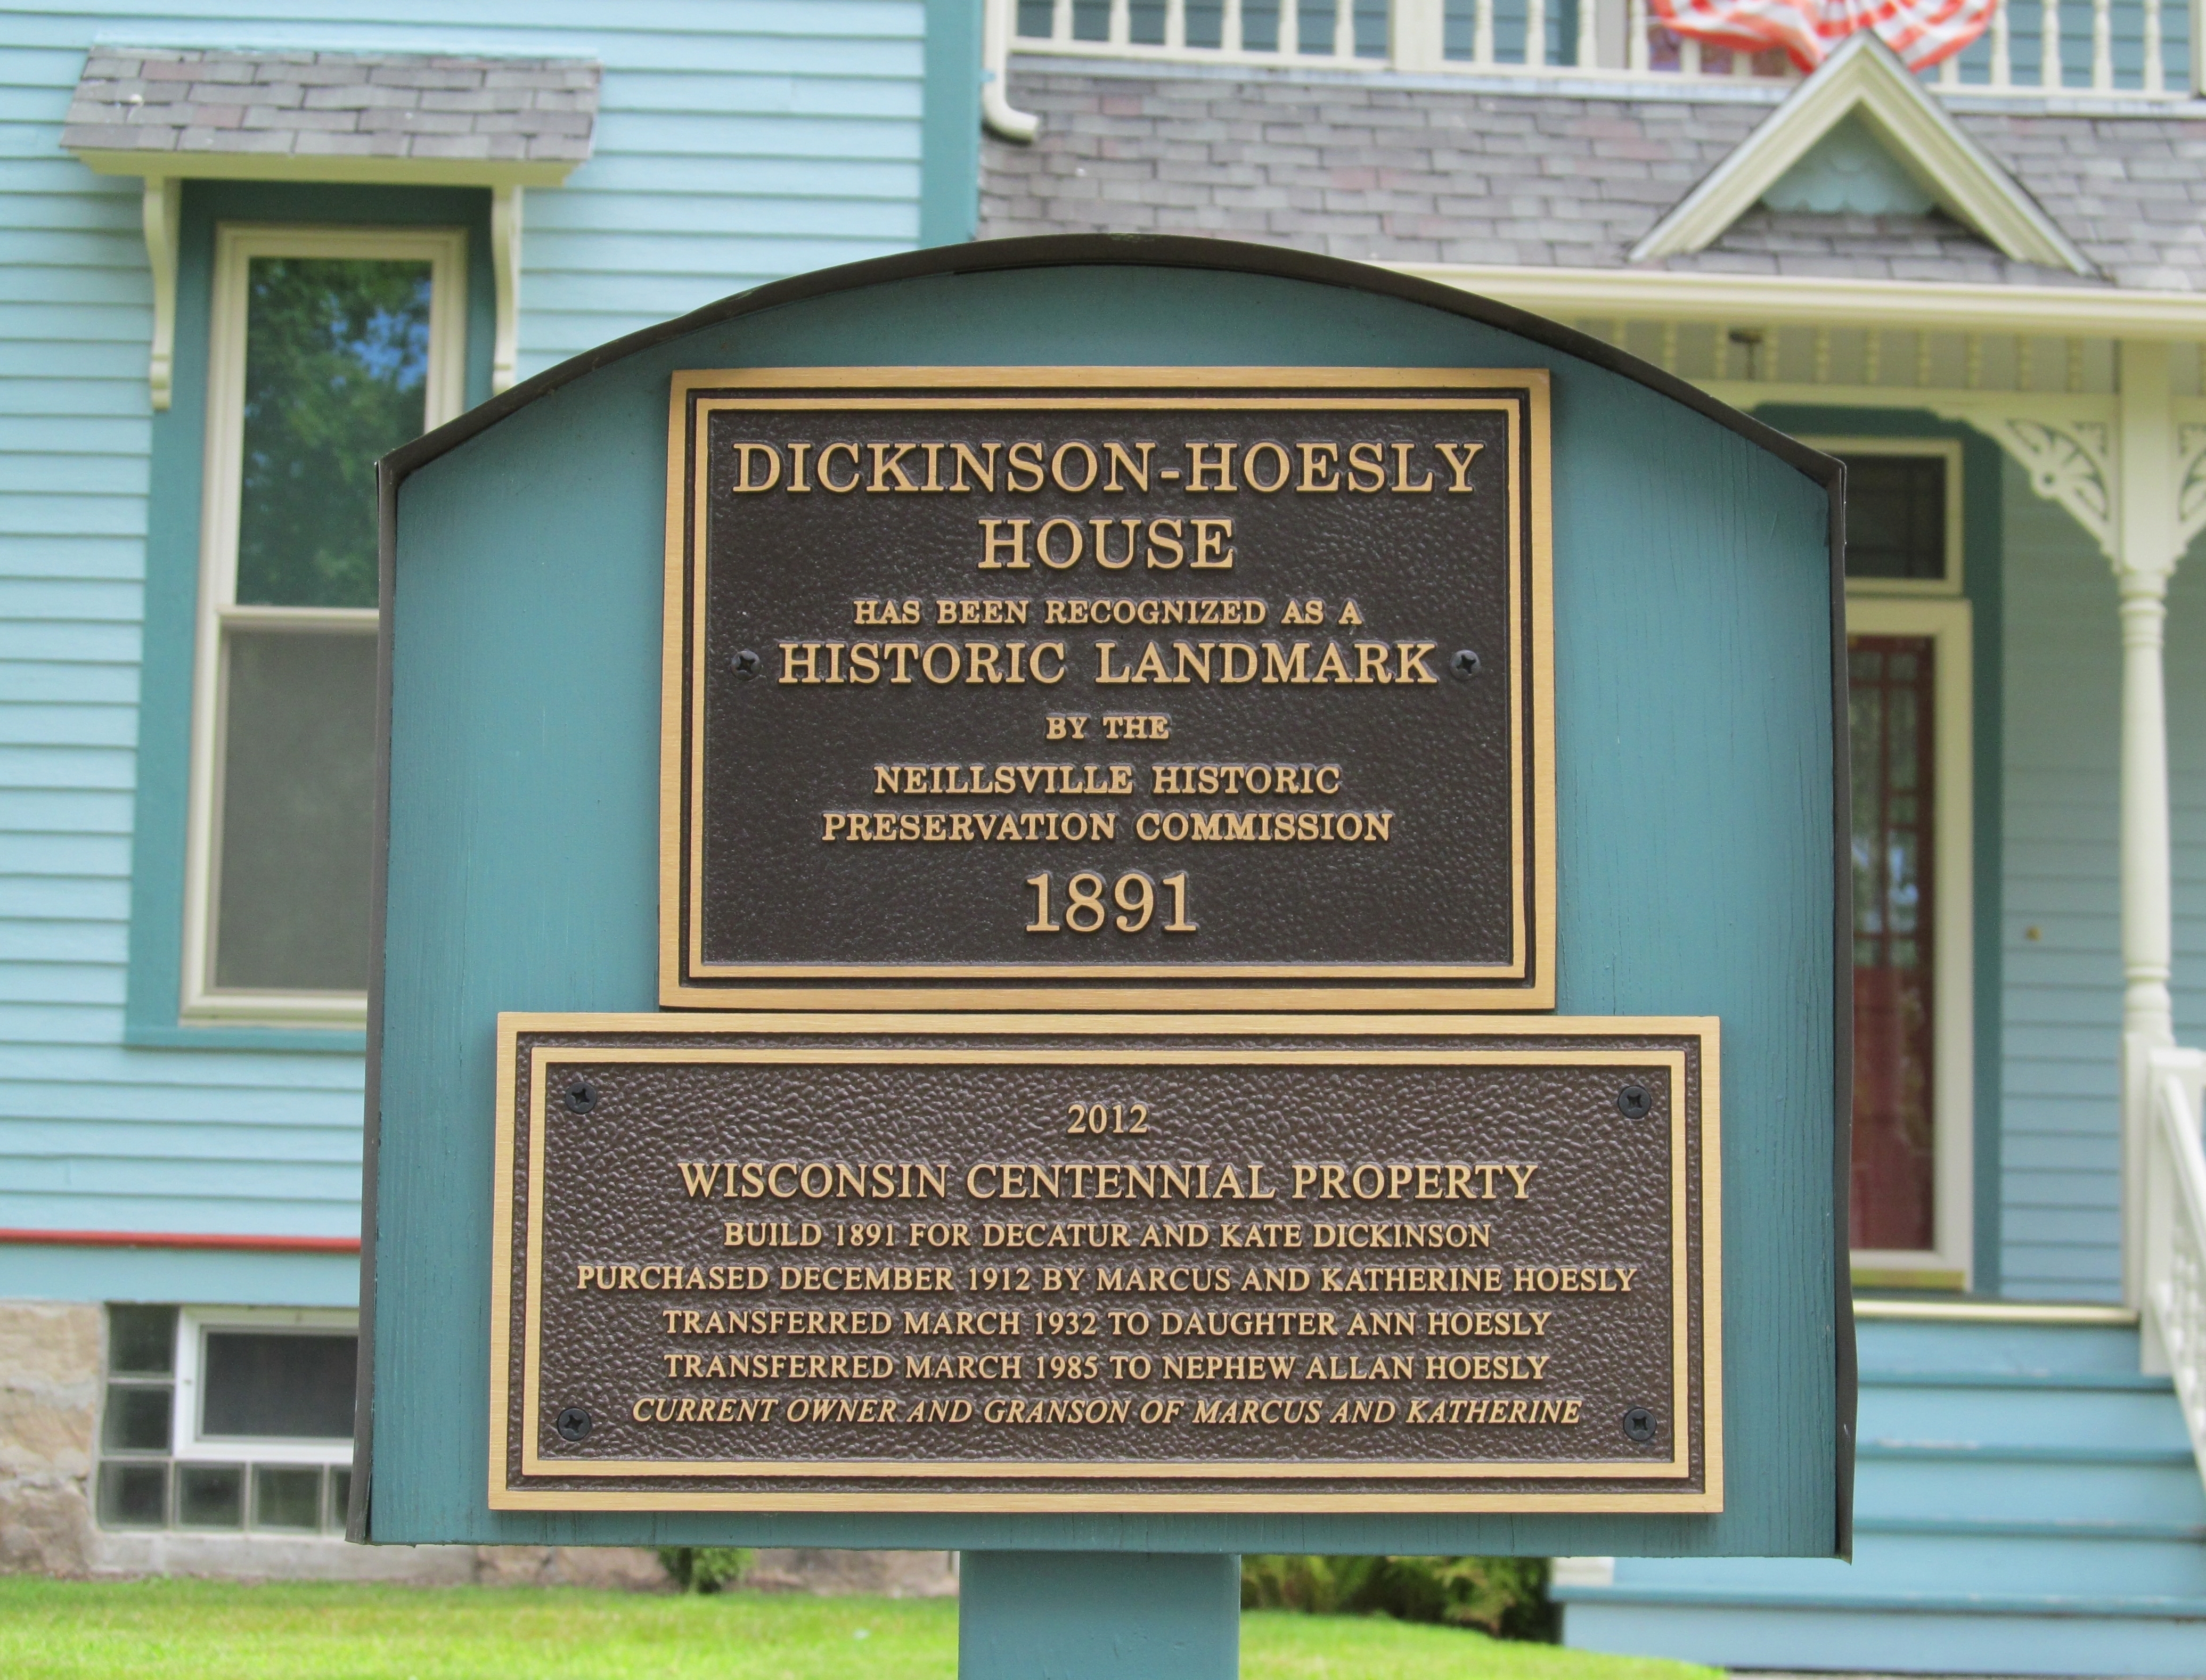 Dickinson-Hoesly House Marker